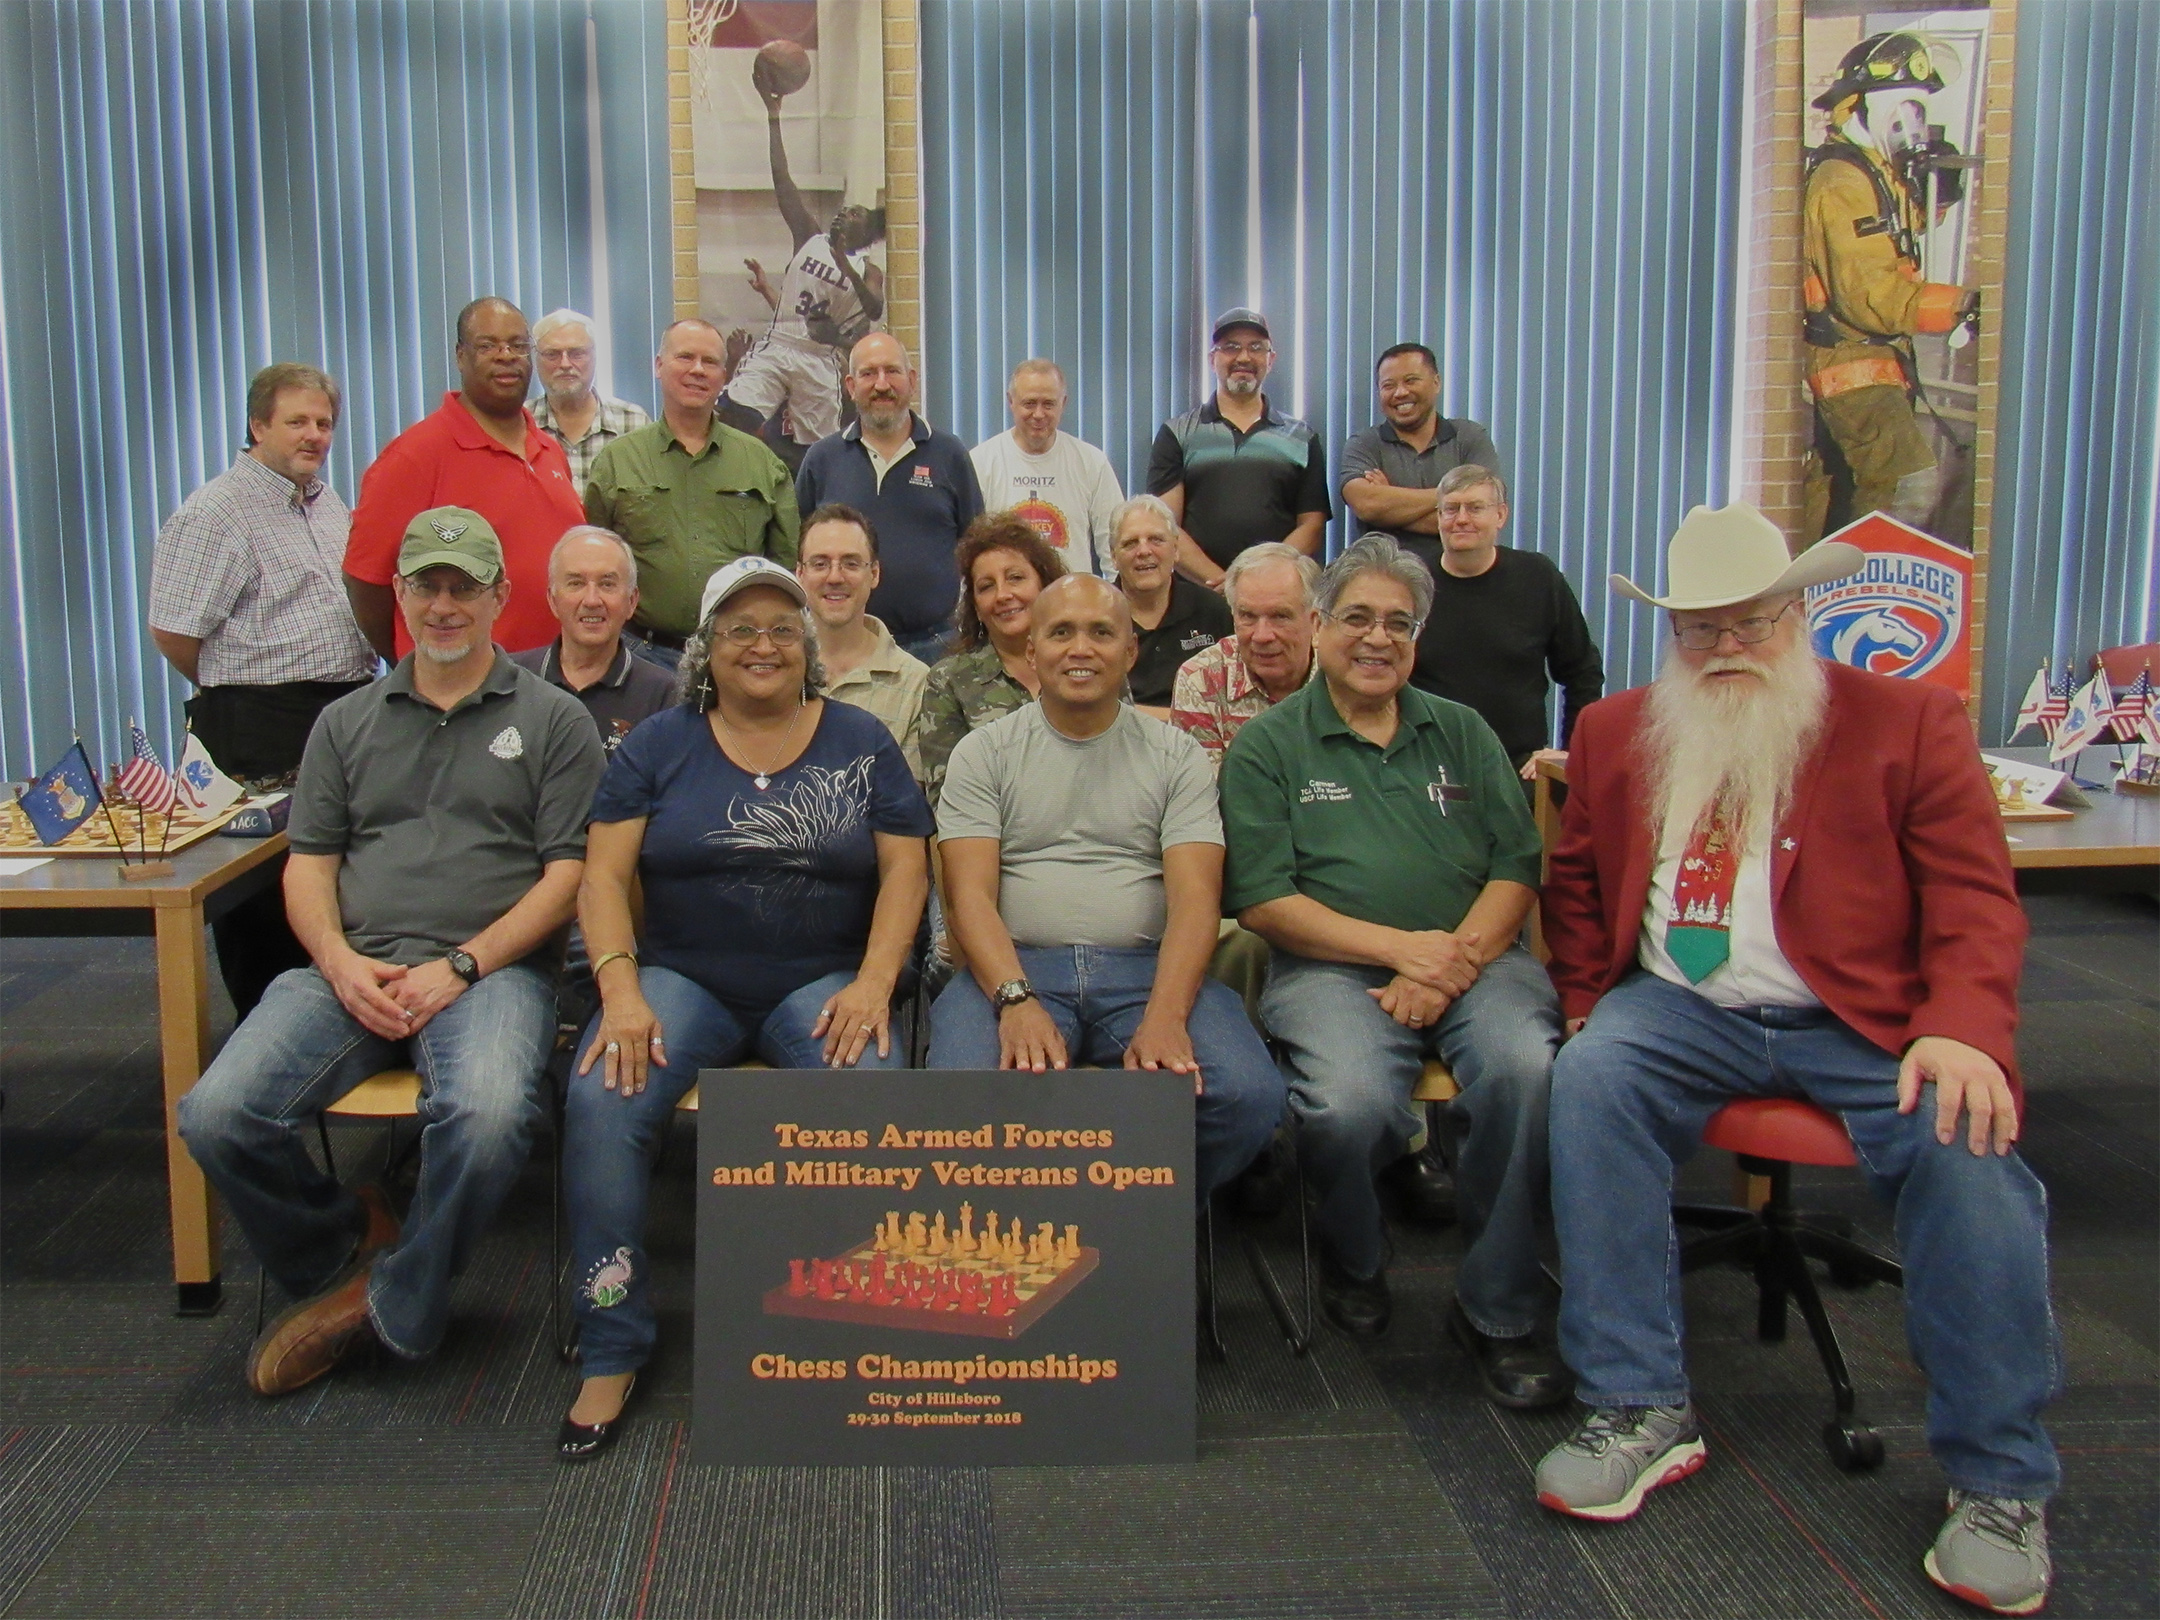 2018 Texas Armed Forces and Military Veterans Open Chess Championships.  First Row (seated from left to right):  Air Force Veteran Bret Lynn; Texas Armed Forces Women’s Champion Clarese Roberts; Oklahoma Armed Forces and Army Champion Neil Naputo; Army Veteran Carmen Chairez; Texas Armed Forces Champion Jim Hollingsworth.  Second Row (seated from left to right):  Texas Military Veterans Champion Charles Fricks; Games Judge Jeffrey Spyrison; Texas Armed Forces Student Champion Sheryl McBroom; the Adjutant, Air Force Retiree Dale Chaney.  Third Row (standing from left to right):  Chief Tournament Director and Champion Texas Hold-um Player Chris Wood; Army Veteran Leon Toliver; Chess Expert and Texas Legacy Champion Ron Farrar; Georgia Armed Forces Chess Champion, Retiree Champion and Chess Expert David Hater.  Third Row (seated from left to right):  Army Veteran Troy Gillispie; Chess Expert and Marines Champion John Ferrell.  Fourth Row (standing left to right):  Cal Chess Armed Forces and Life Member Champion Tom Boyd; Texas Chess Association President and Texas Armed Forces Navy Champion Tom Crane; Air Force Champion Jimmy Nazario; Texas Armed Forces Unrated Champion Jedwayne Bowser.  Group photo by Joe Shaughnessy.